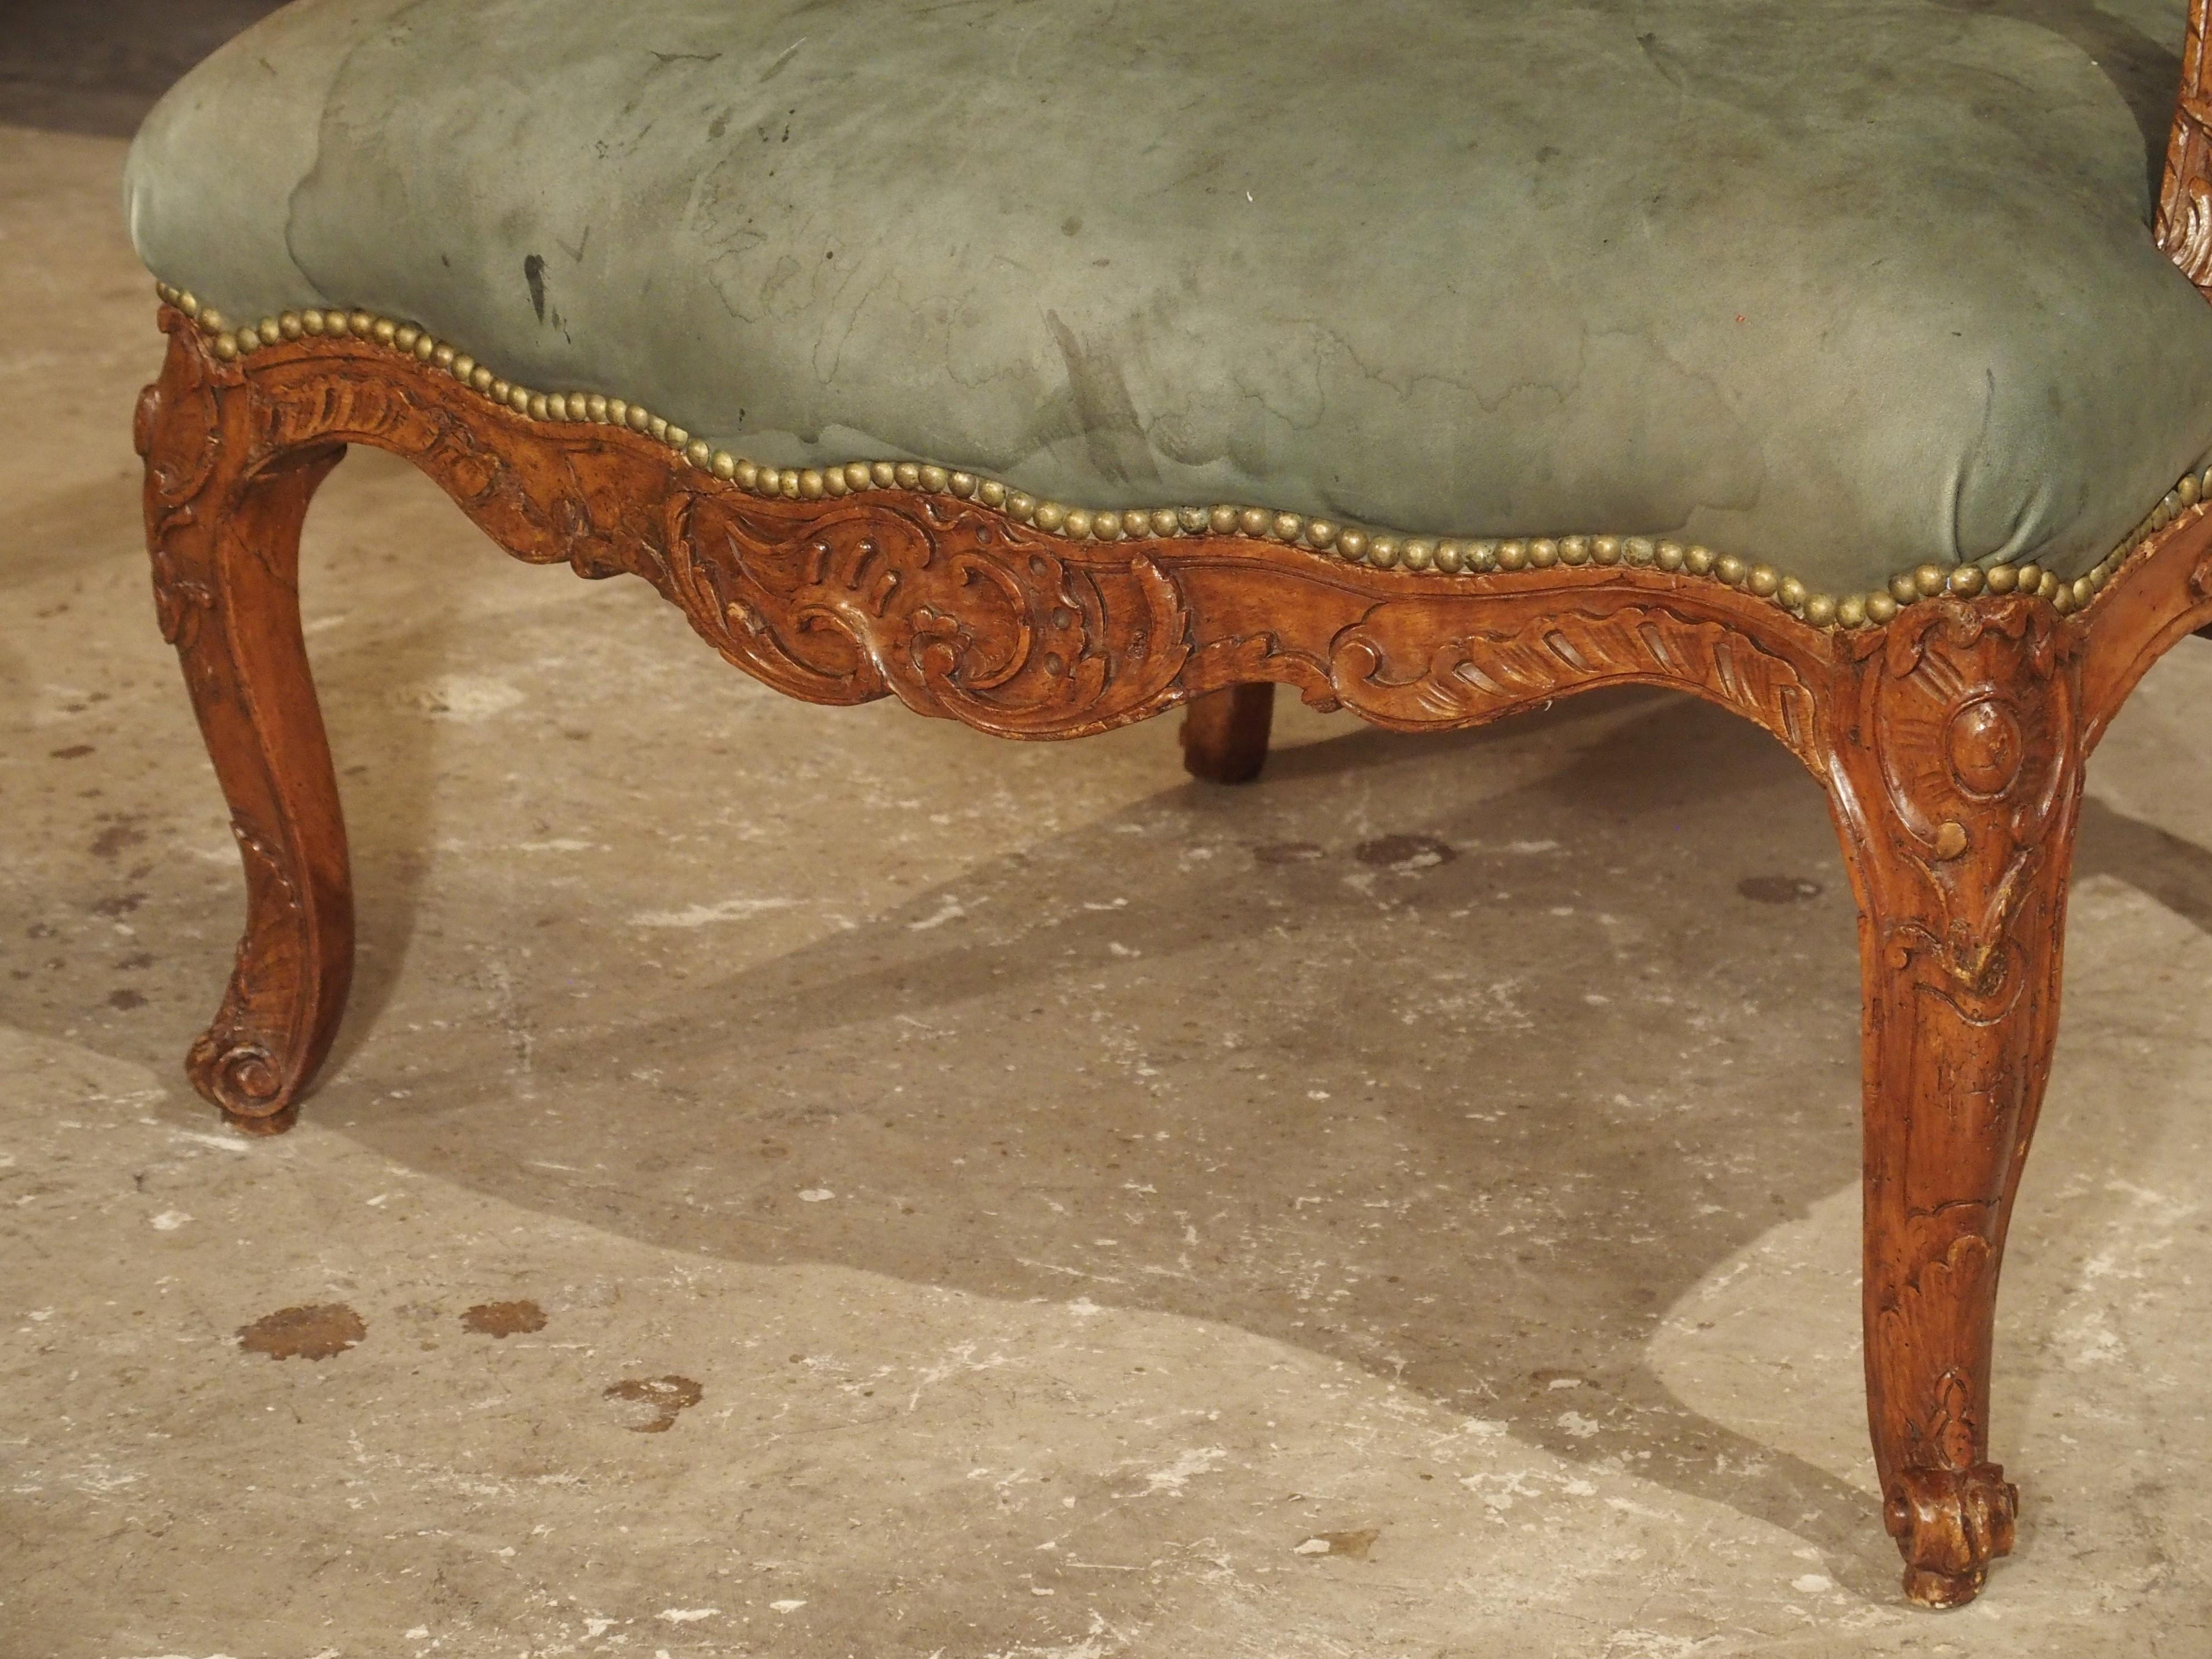 Louis XV 18th Century Walnut Wood Fauteuil by Nicolas Foliot, Furniture Maker to the King